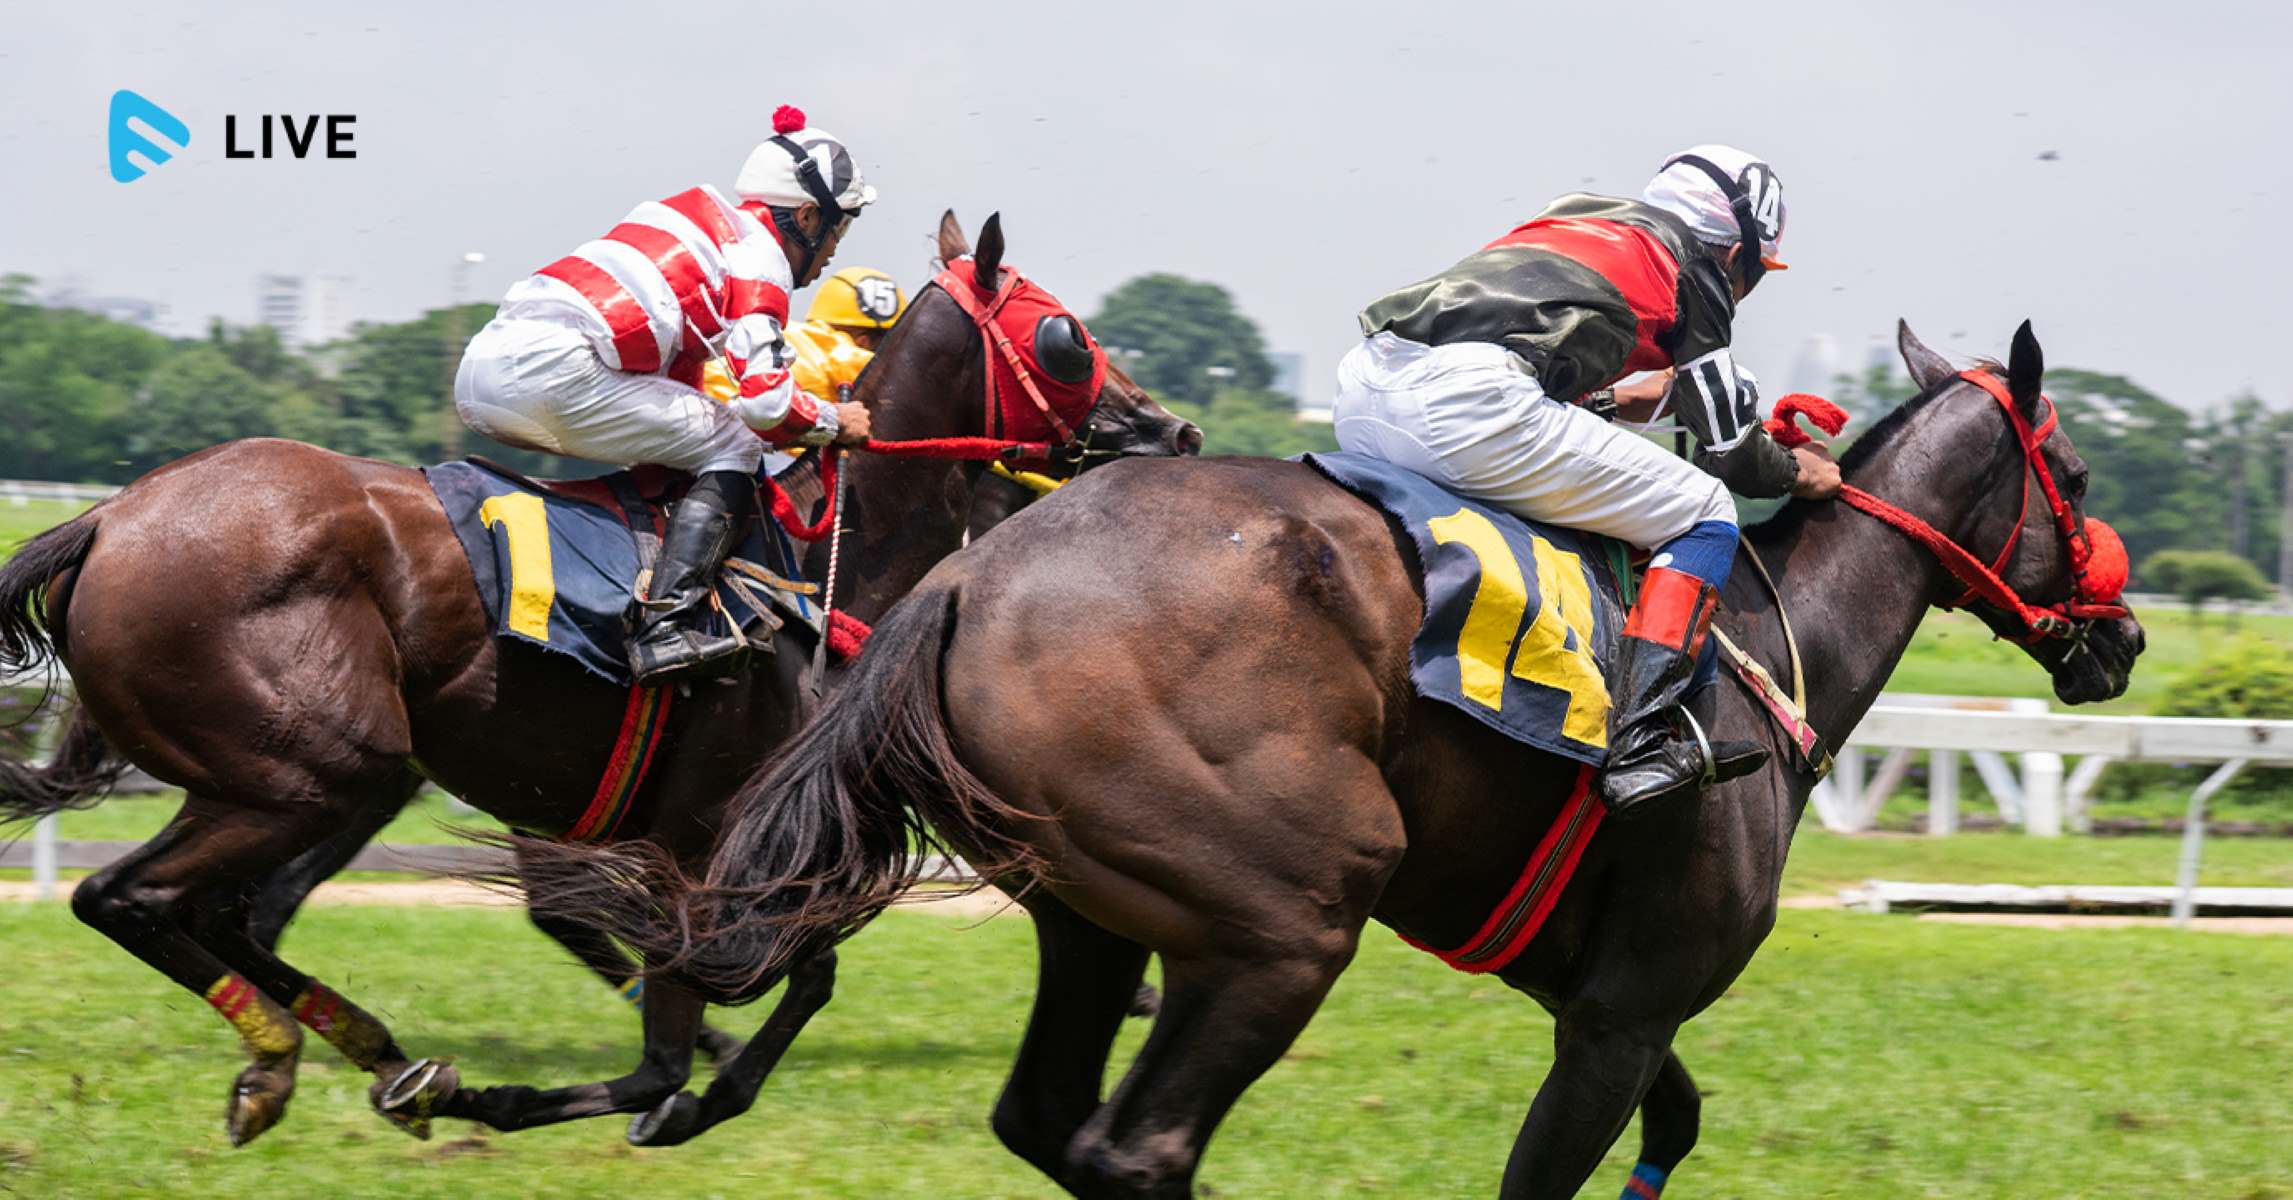 How To Watch Live Horse Racing